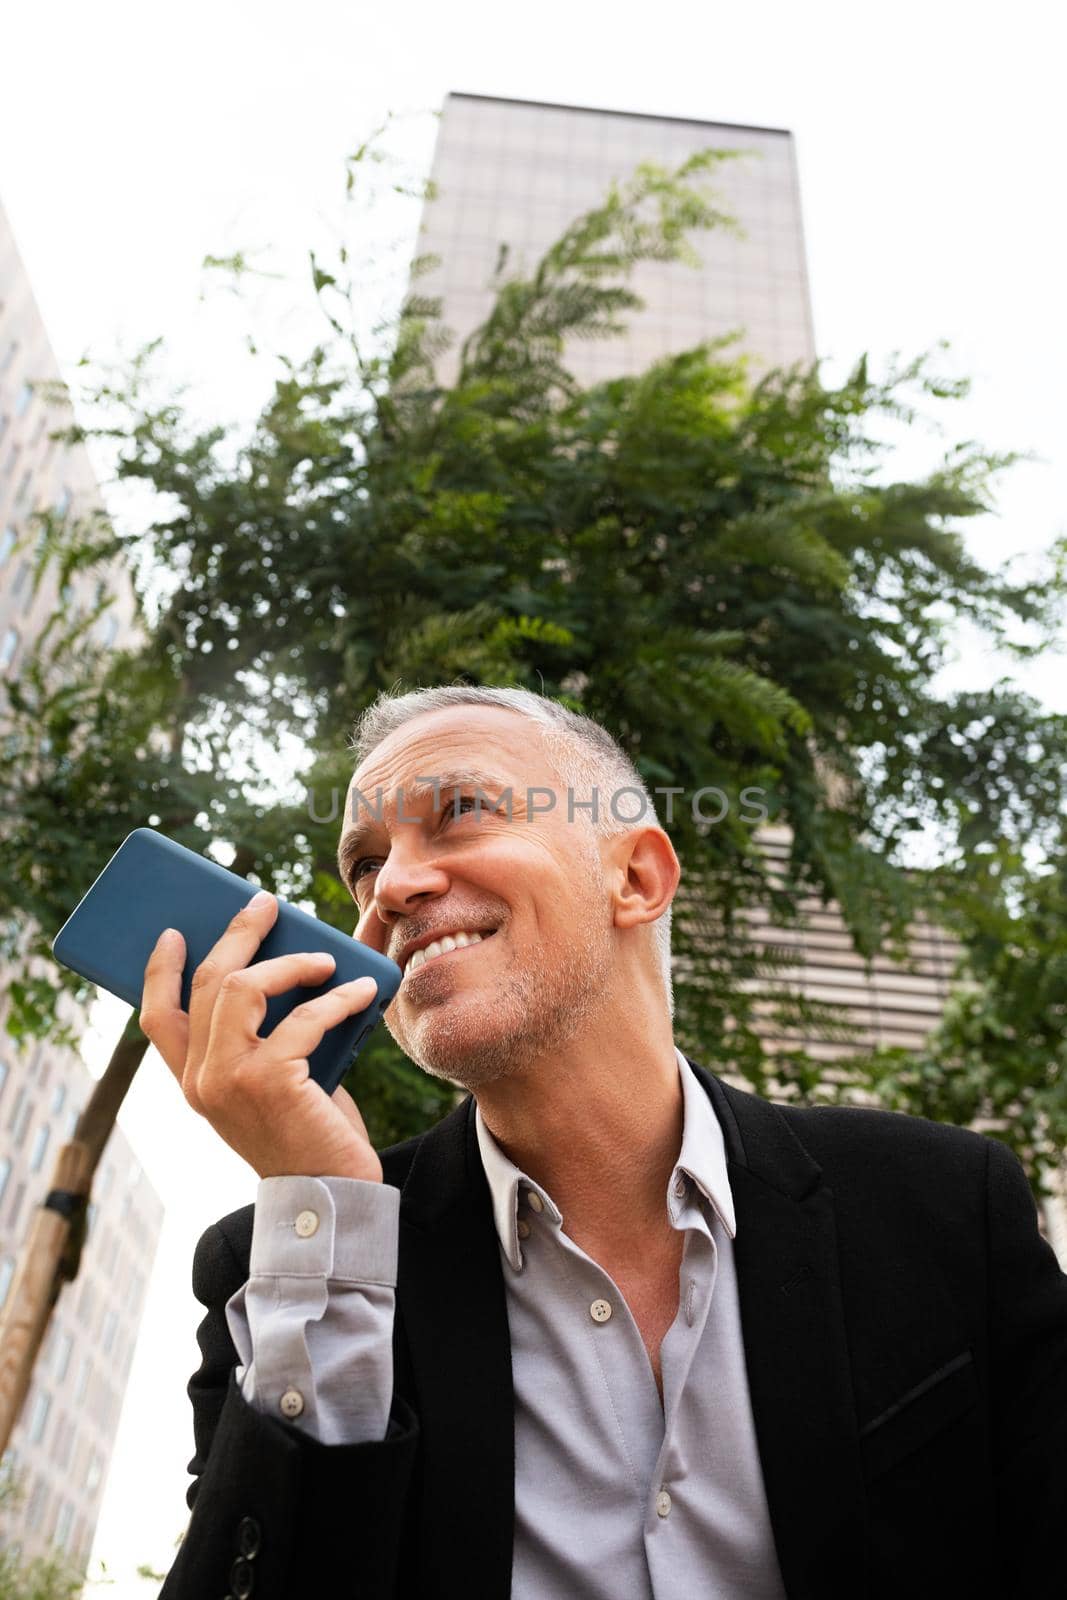 Smiling caucasian man sending voice message with mobile phone outdoors. Copy space. Vertical image. by Hoverstock